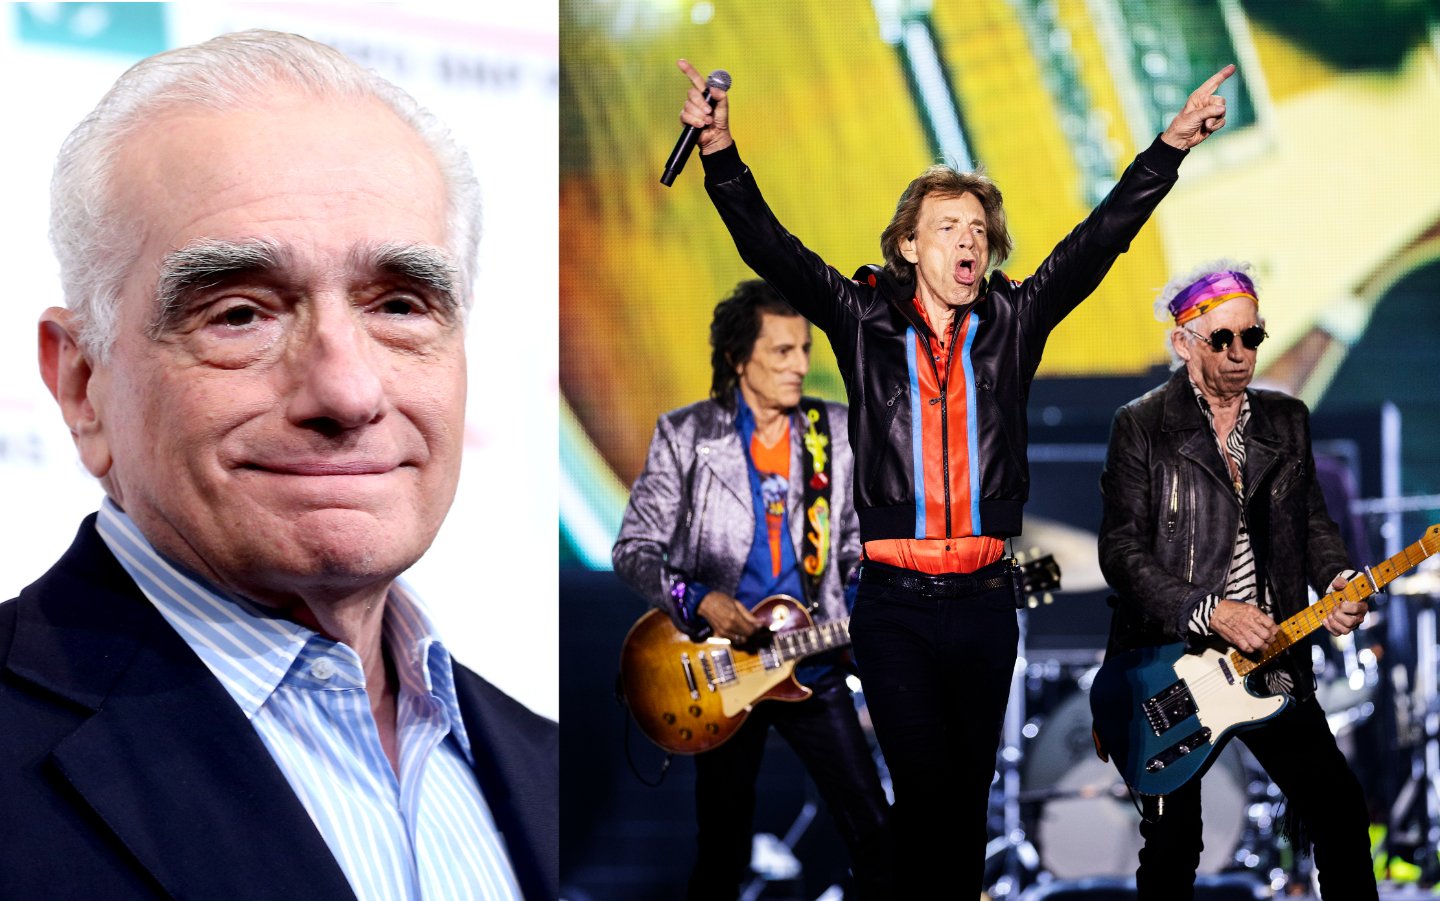 Martin Scorsese Once Said His Films ‘Would Be Unthinkable Without [the Rolling Stones]’